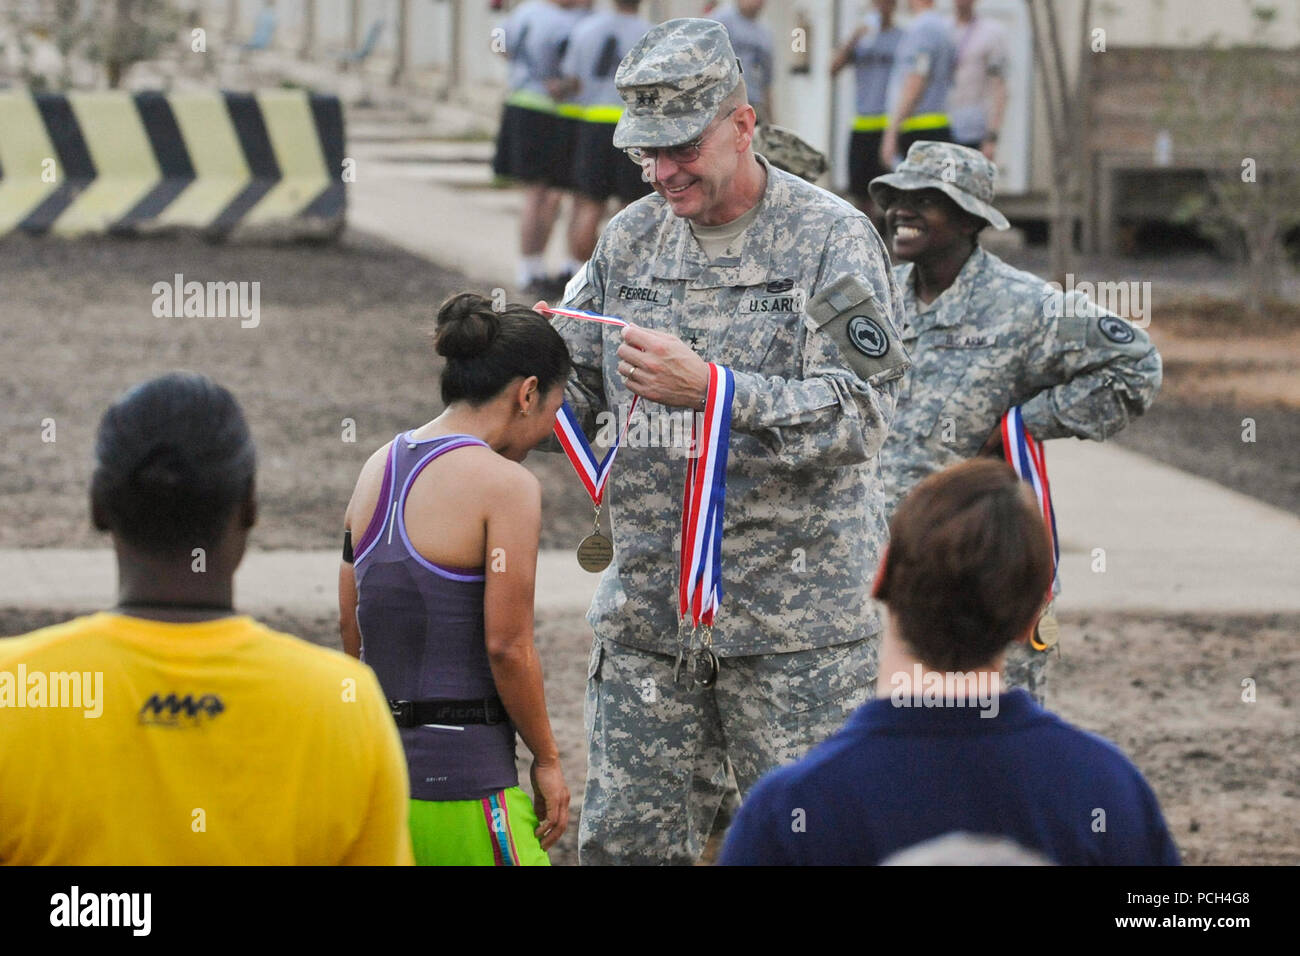 CAMP LEMONNIER, Djibouti (Sept. 21, 2013) Army Maj. Gen. Terry, commander, Combined Joint Task Force - Horn of Africa, presents Air force Maj. Christina Perez with a medal at the finish line of the Air Force Half Marathon and 10K combined races on Camp Lemonnier, held in honor of the Air Force's 66th birthday. Perez finished in second place for the women's category of the half-marathon, with a time of 1:53:21. Stock Photo